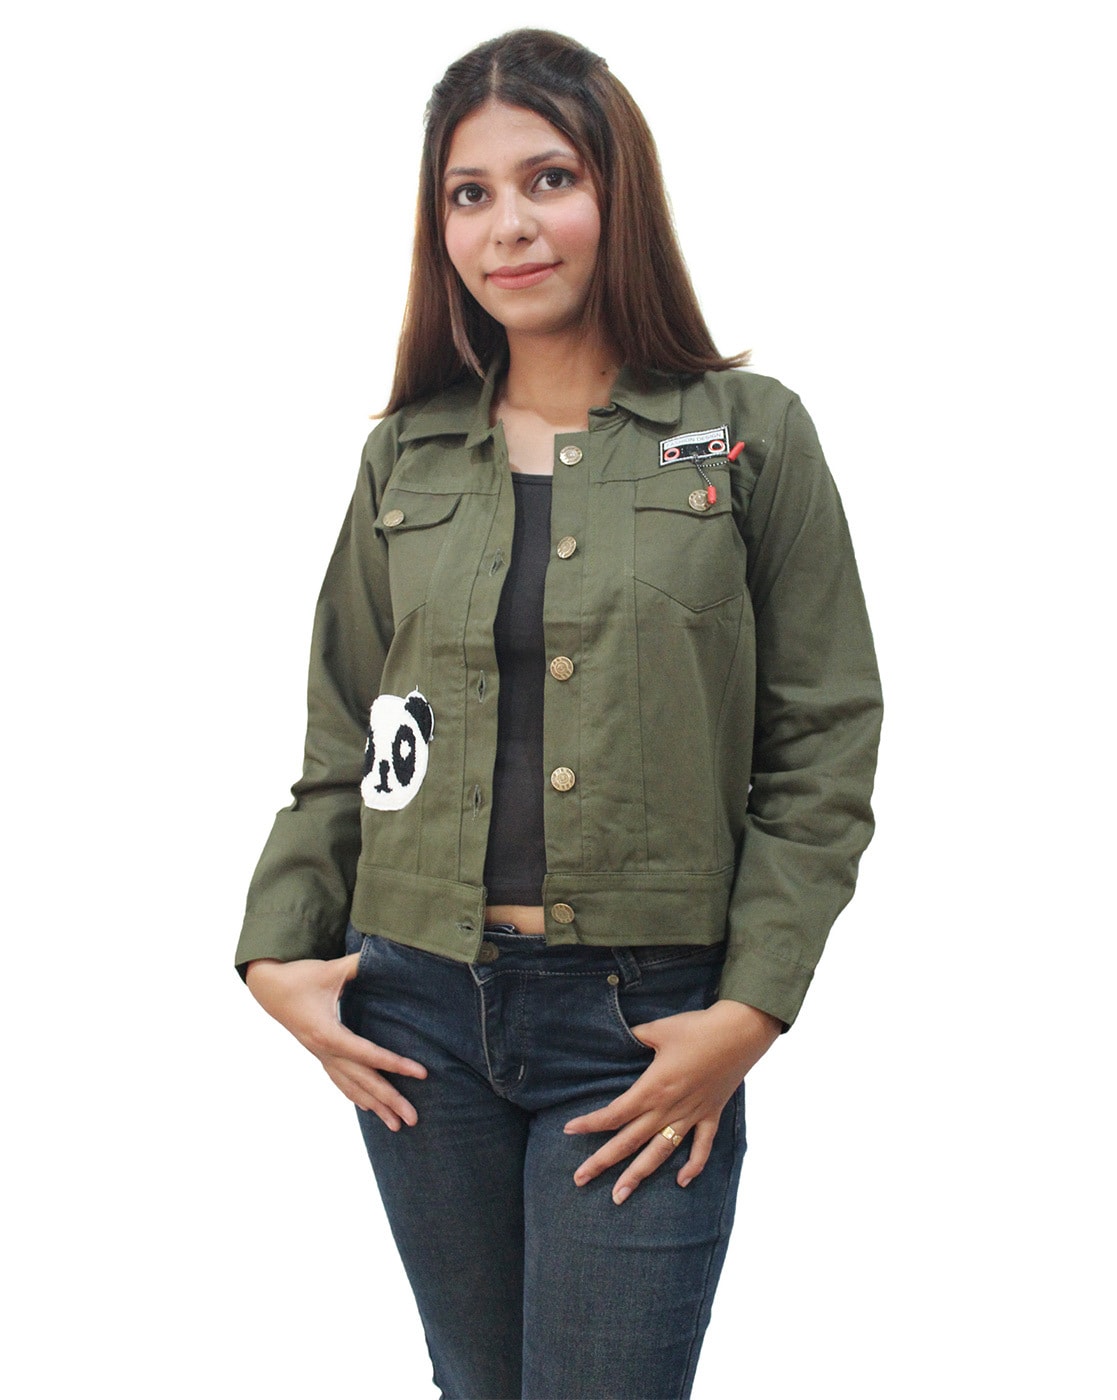 Womens Green Jackets | Army Green Jacket Olive Utility | Jacket outfit women,  Green denim jacket, Green jacket outfit